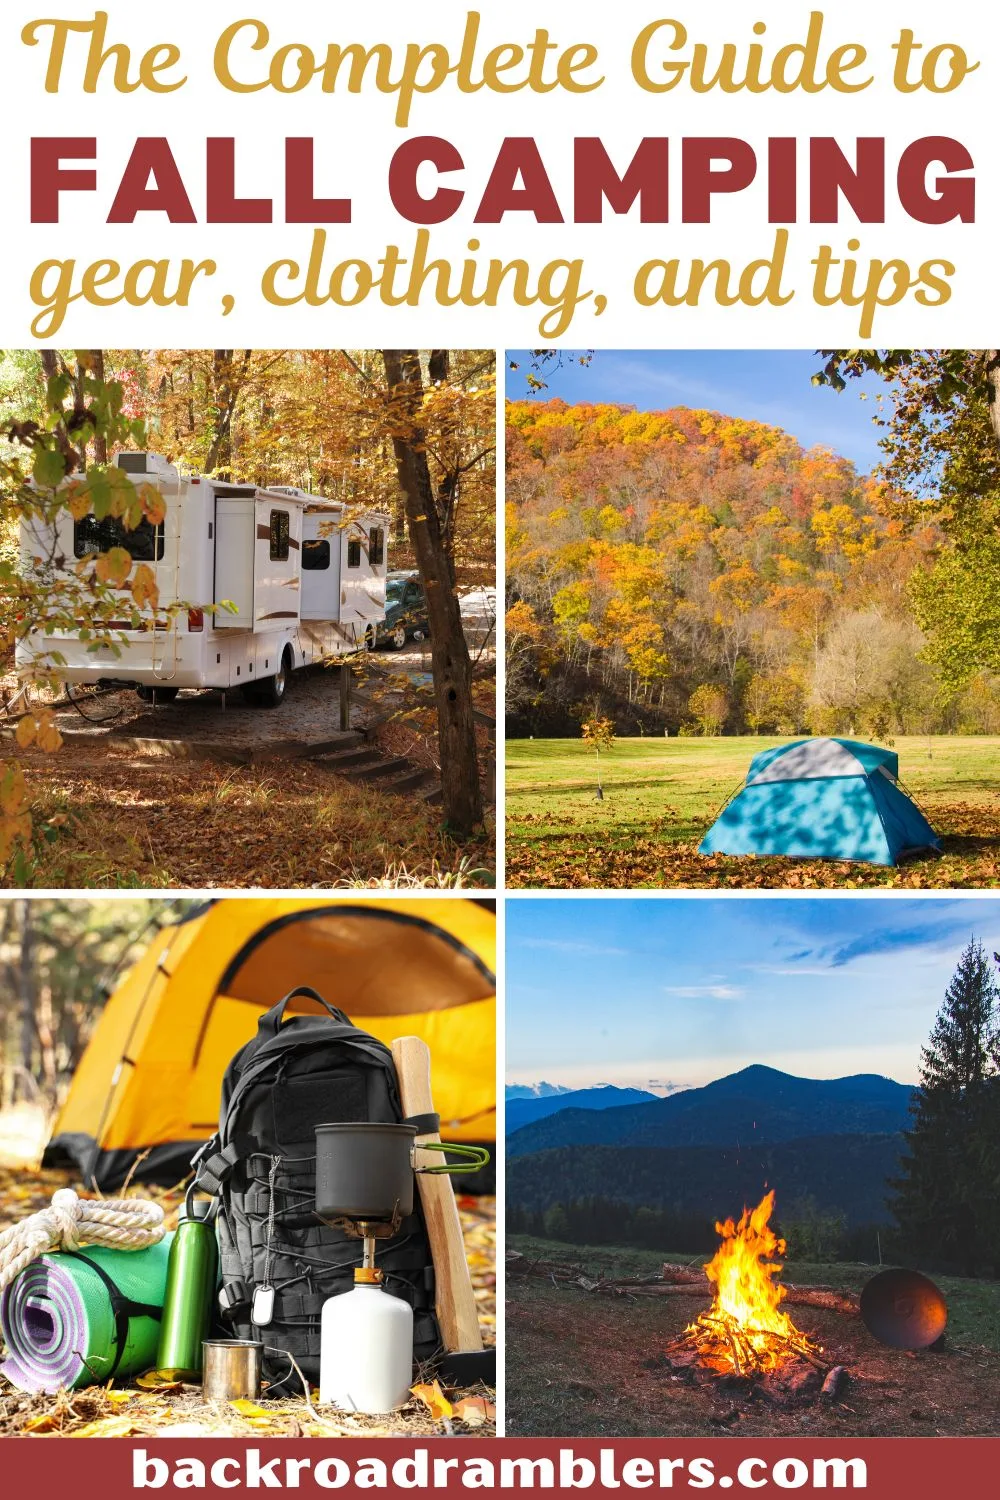 A collage of photos featuring fall camping.